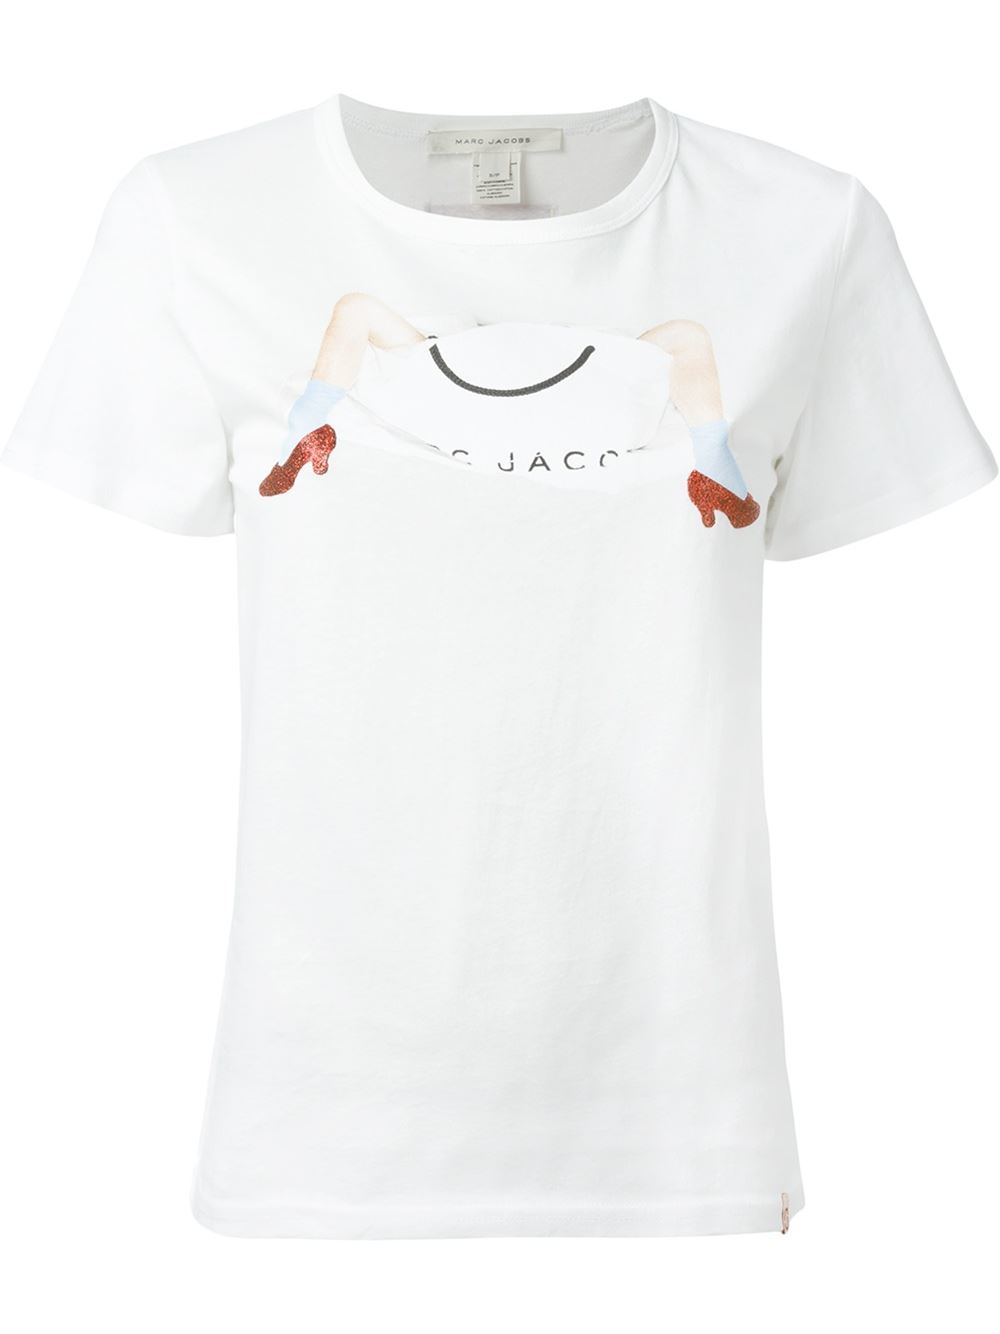 Marc jacobs Cotton T-shirt in White | Lyst